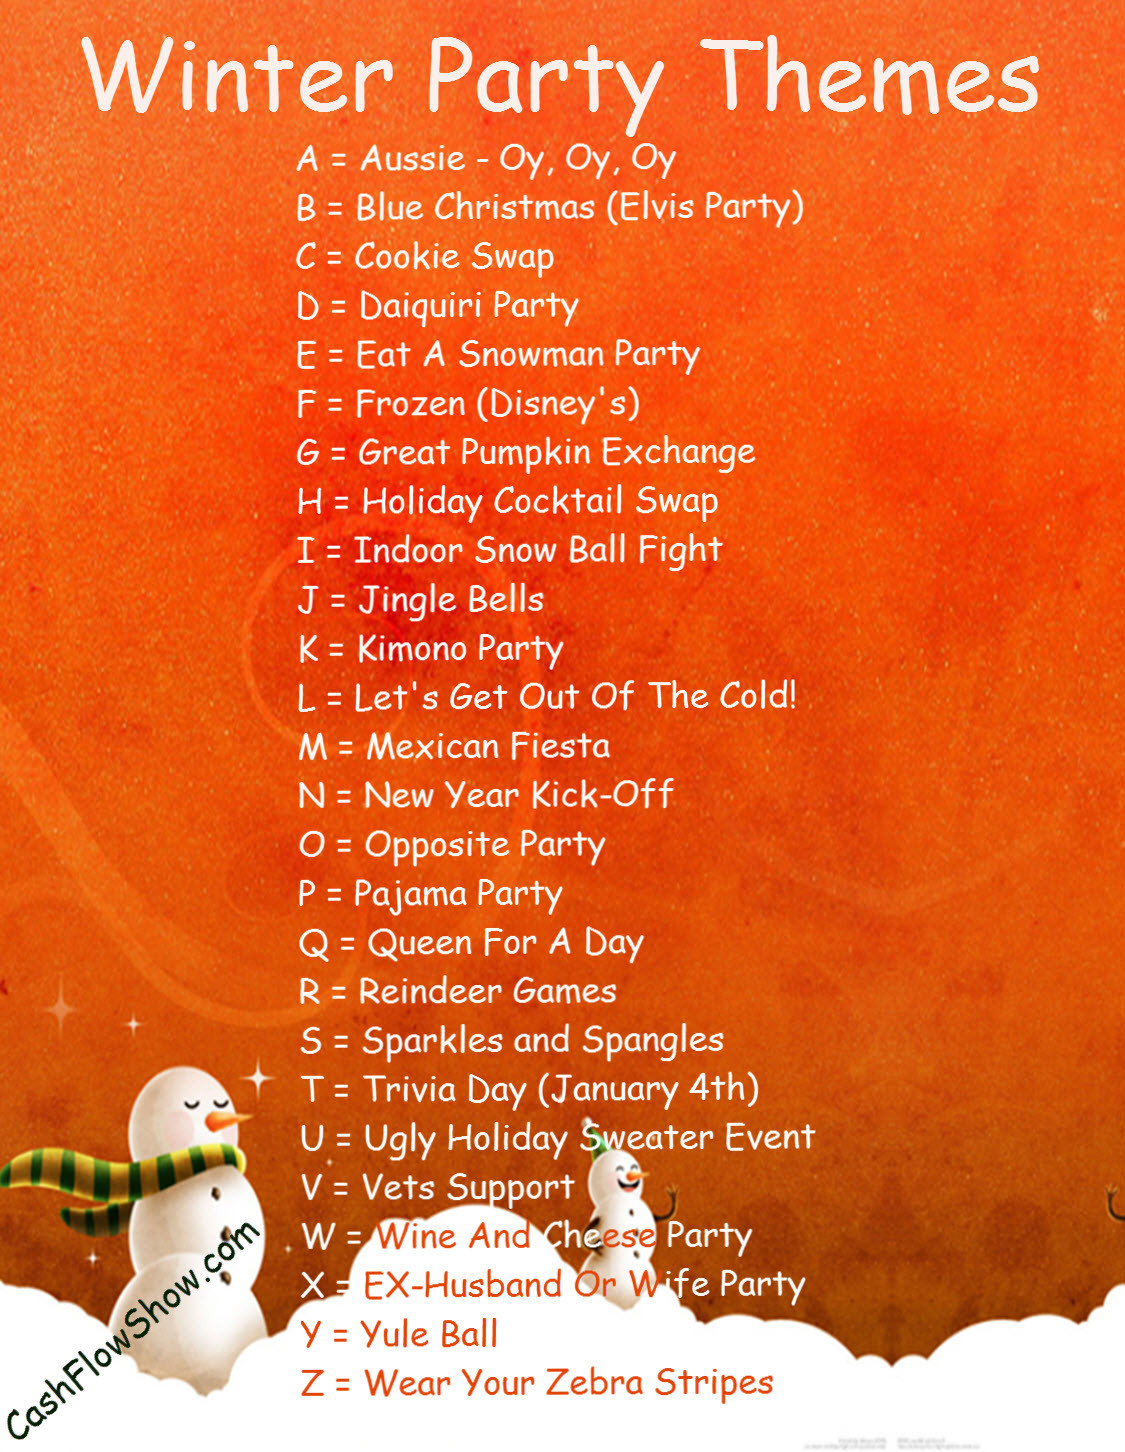 Fun Work Christmas Party Ideas
 Read A Z List To Find A Winter Party Theme For Your Event